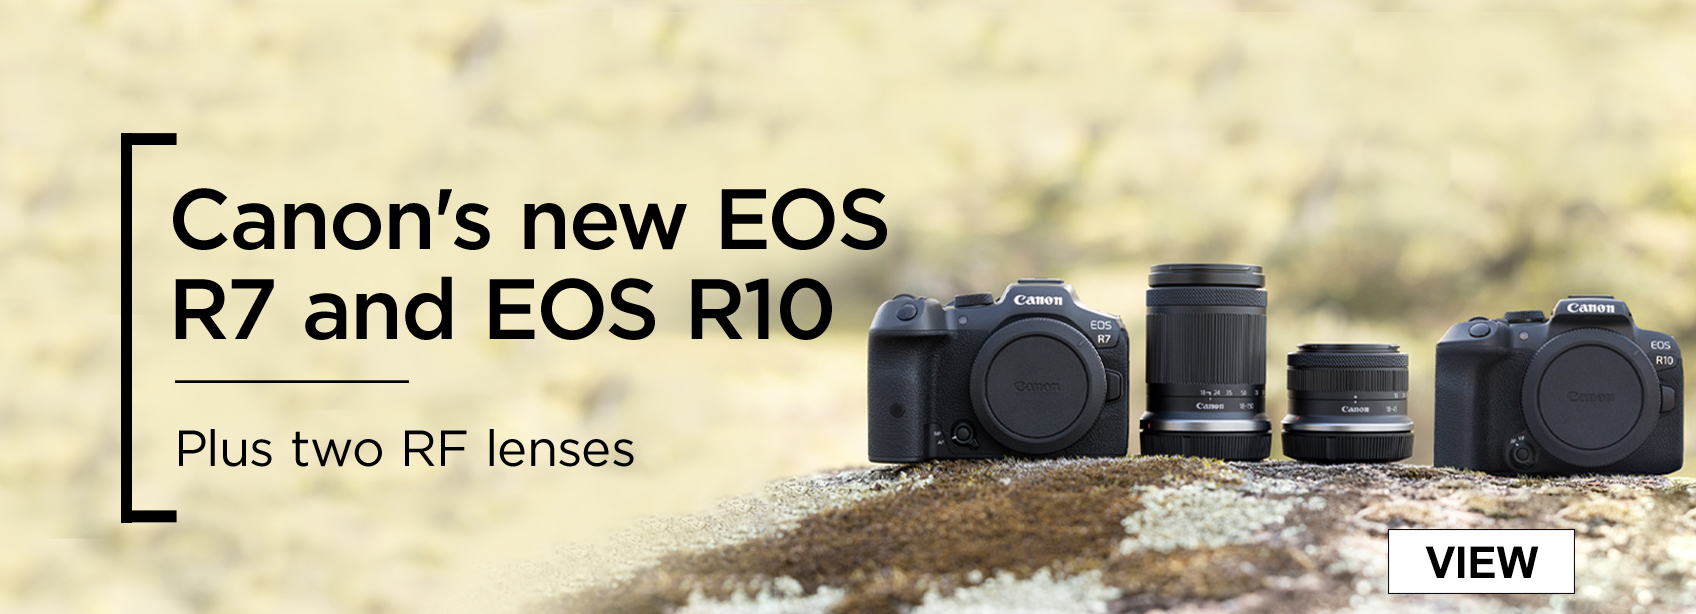 Canon's new EOS R7 and EOS R10 - Plus two RF lenses